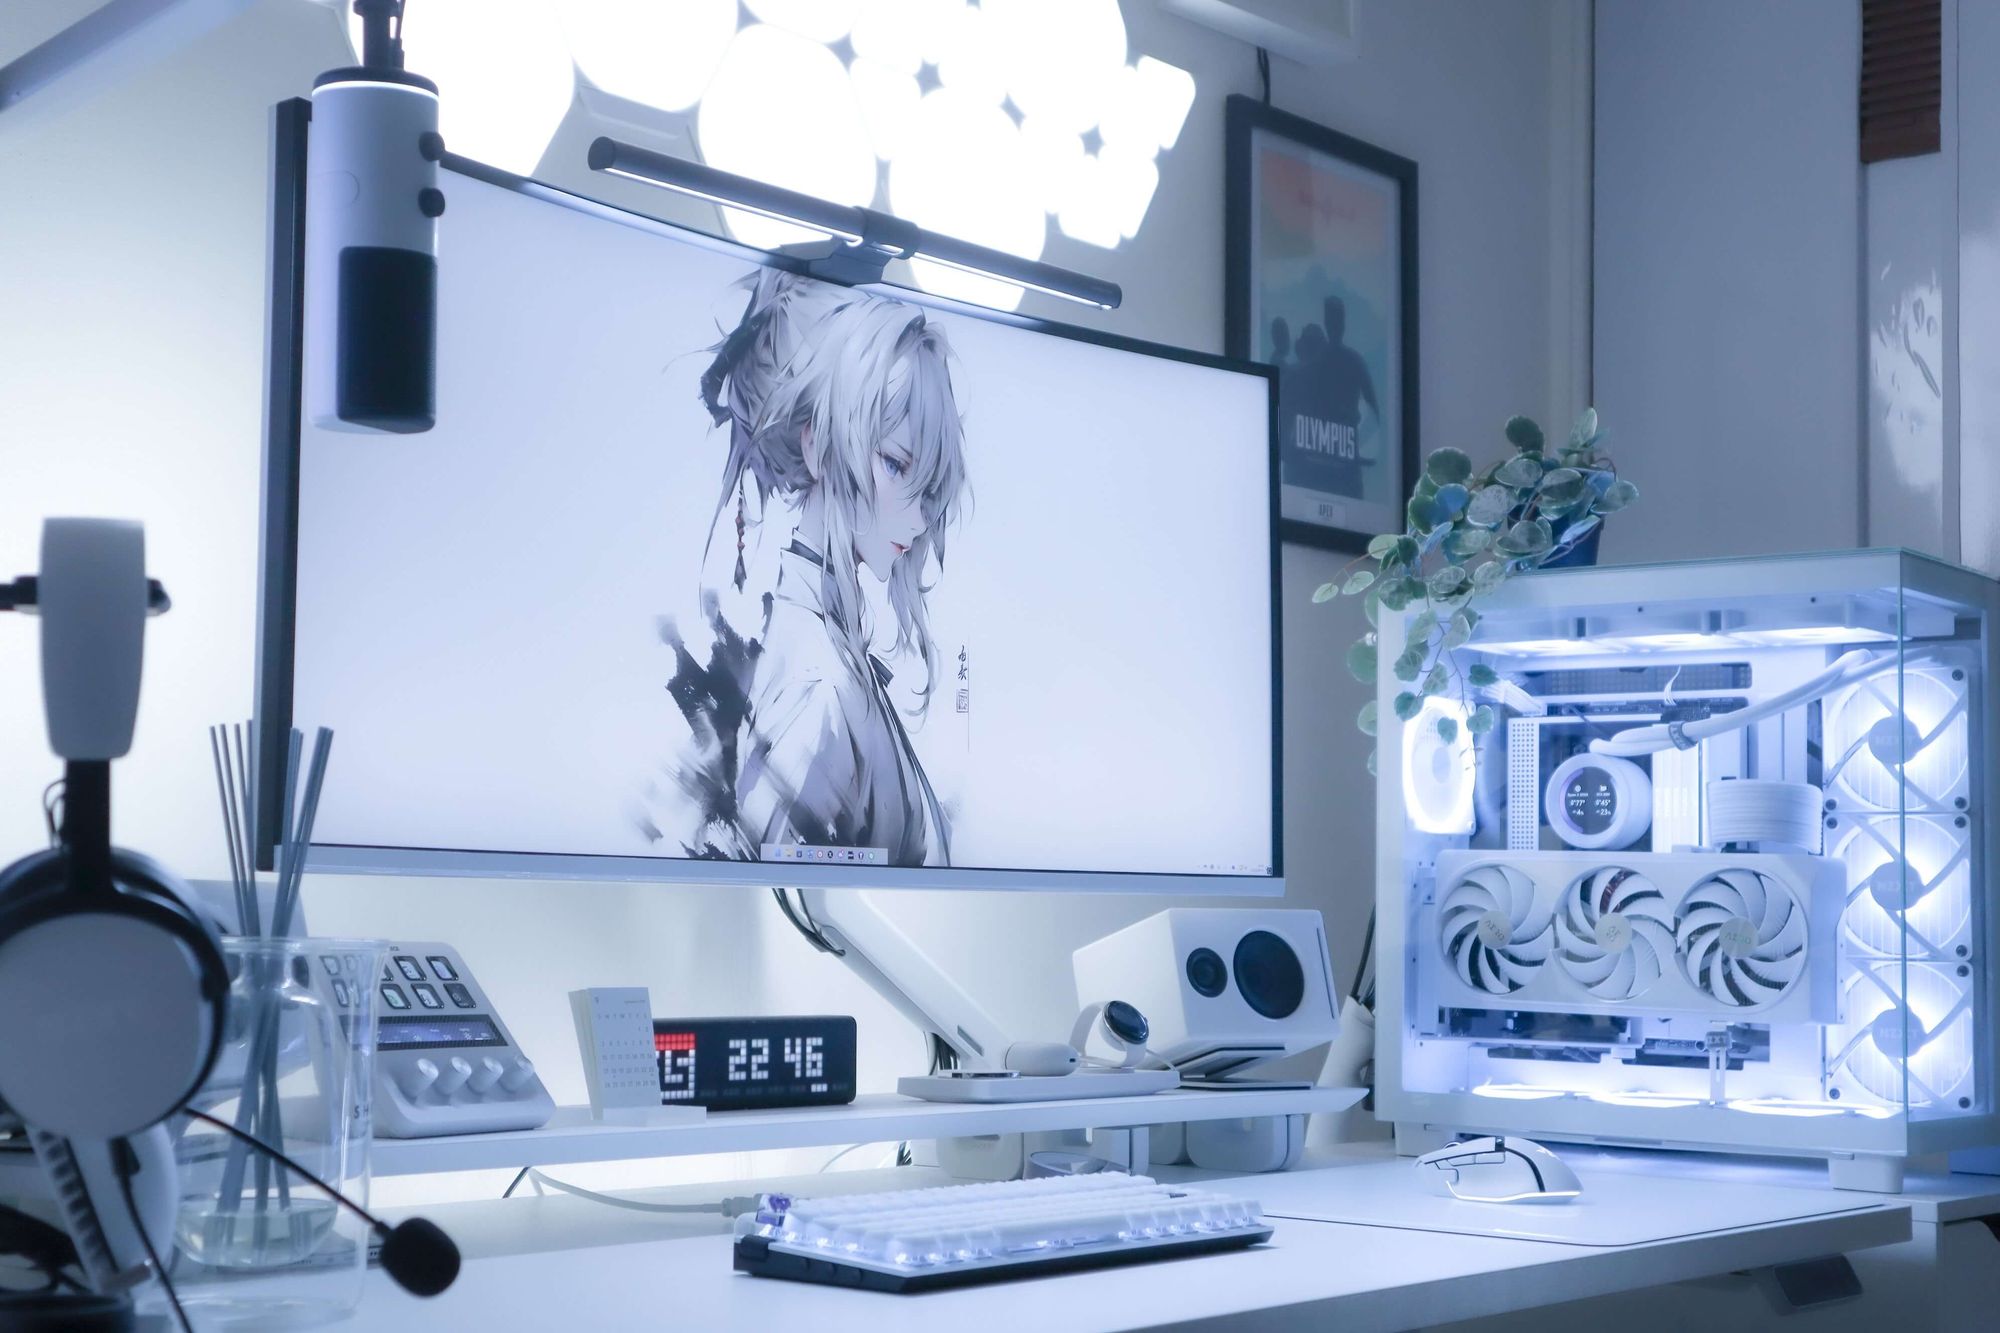 A stylish and futuristic gaming desk setup featuring a large monitor with an anime character wallpaper, backlit by ambient lighting, a custom white PC case with internal lighting, modern peripherals, and a digital clock, all arranged neatly on a clean white desk